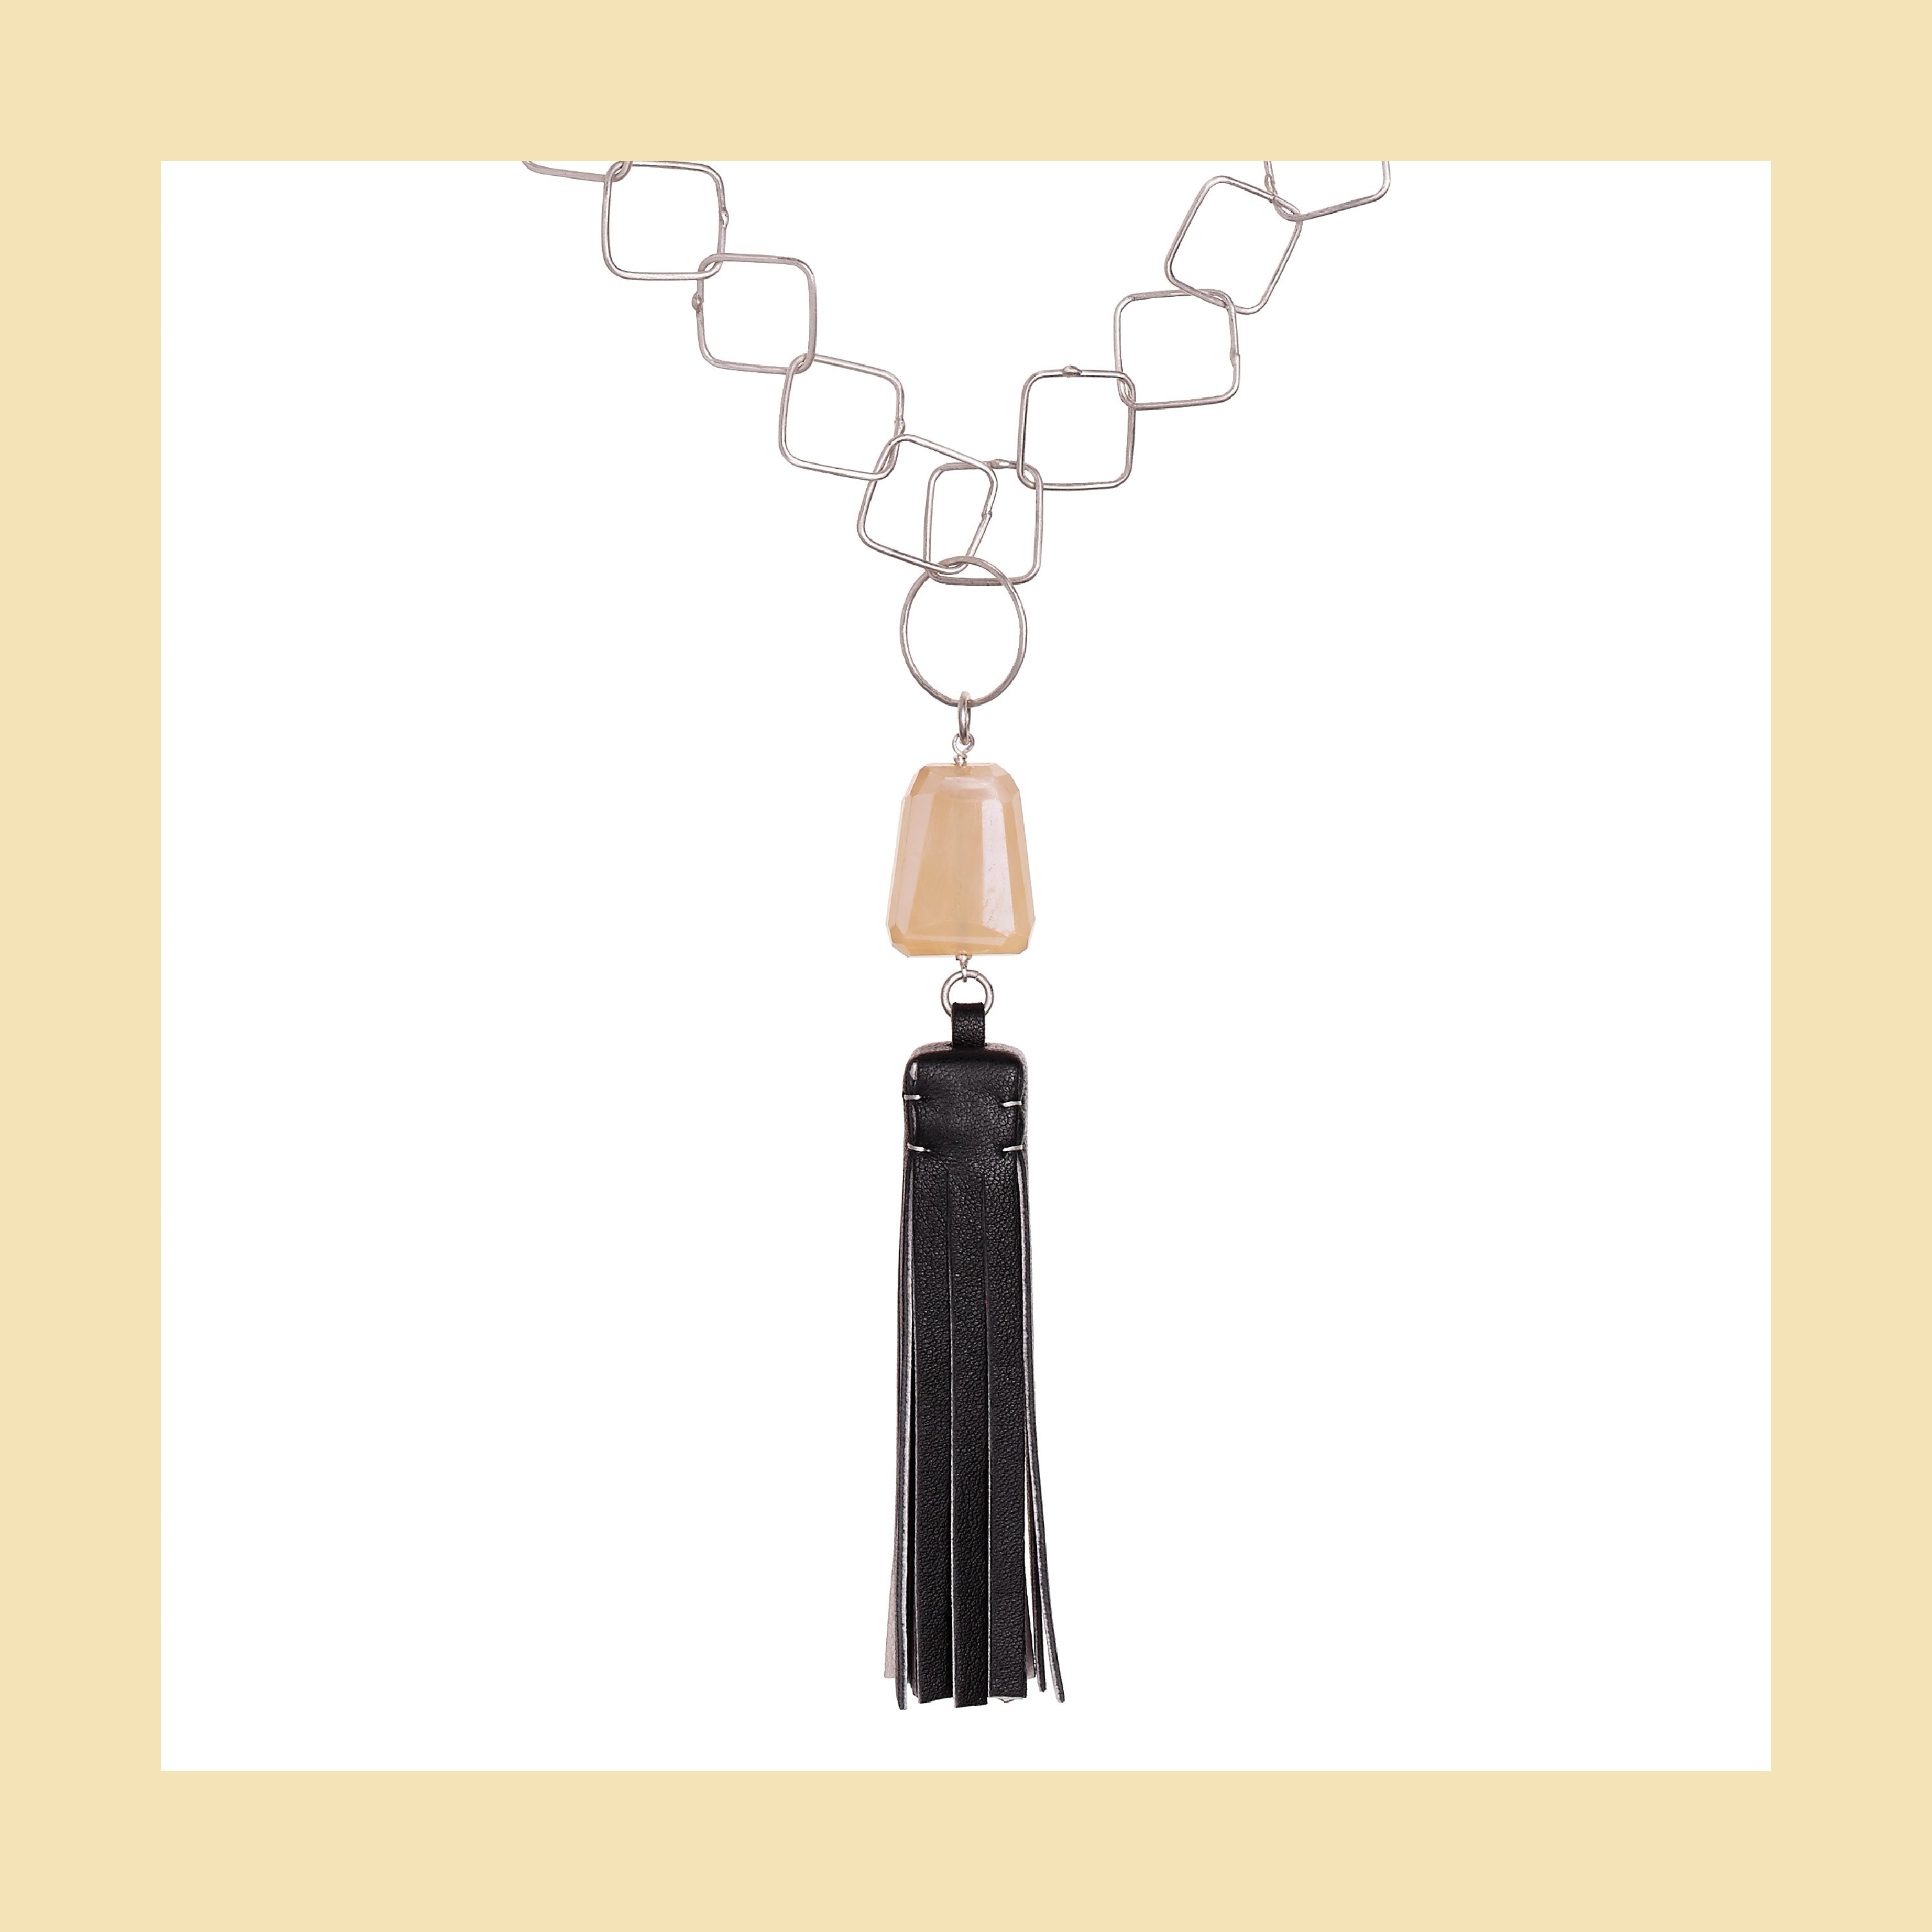 Tassel “Square” Necklace with Black & White Leather and Chalcedony